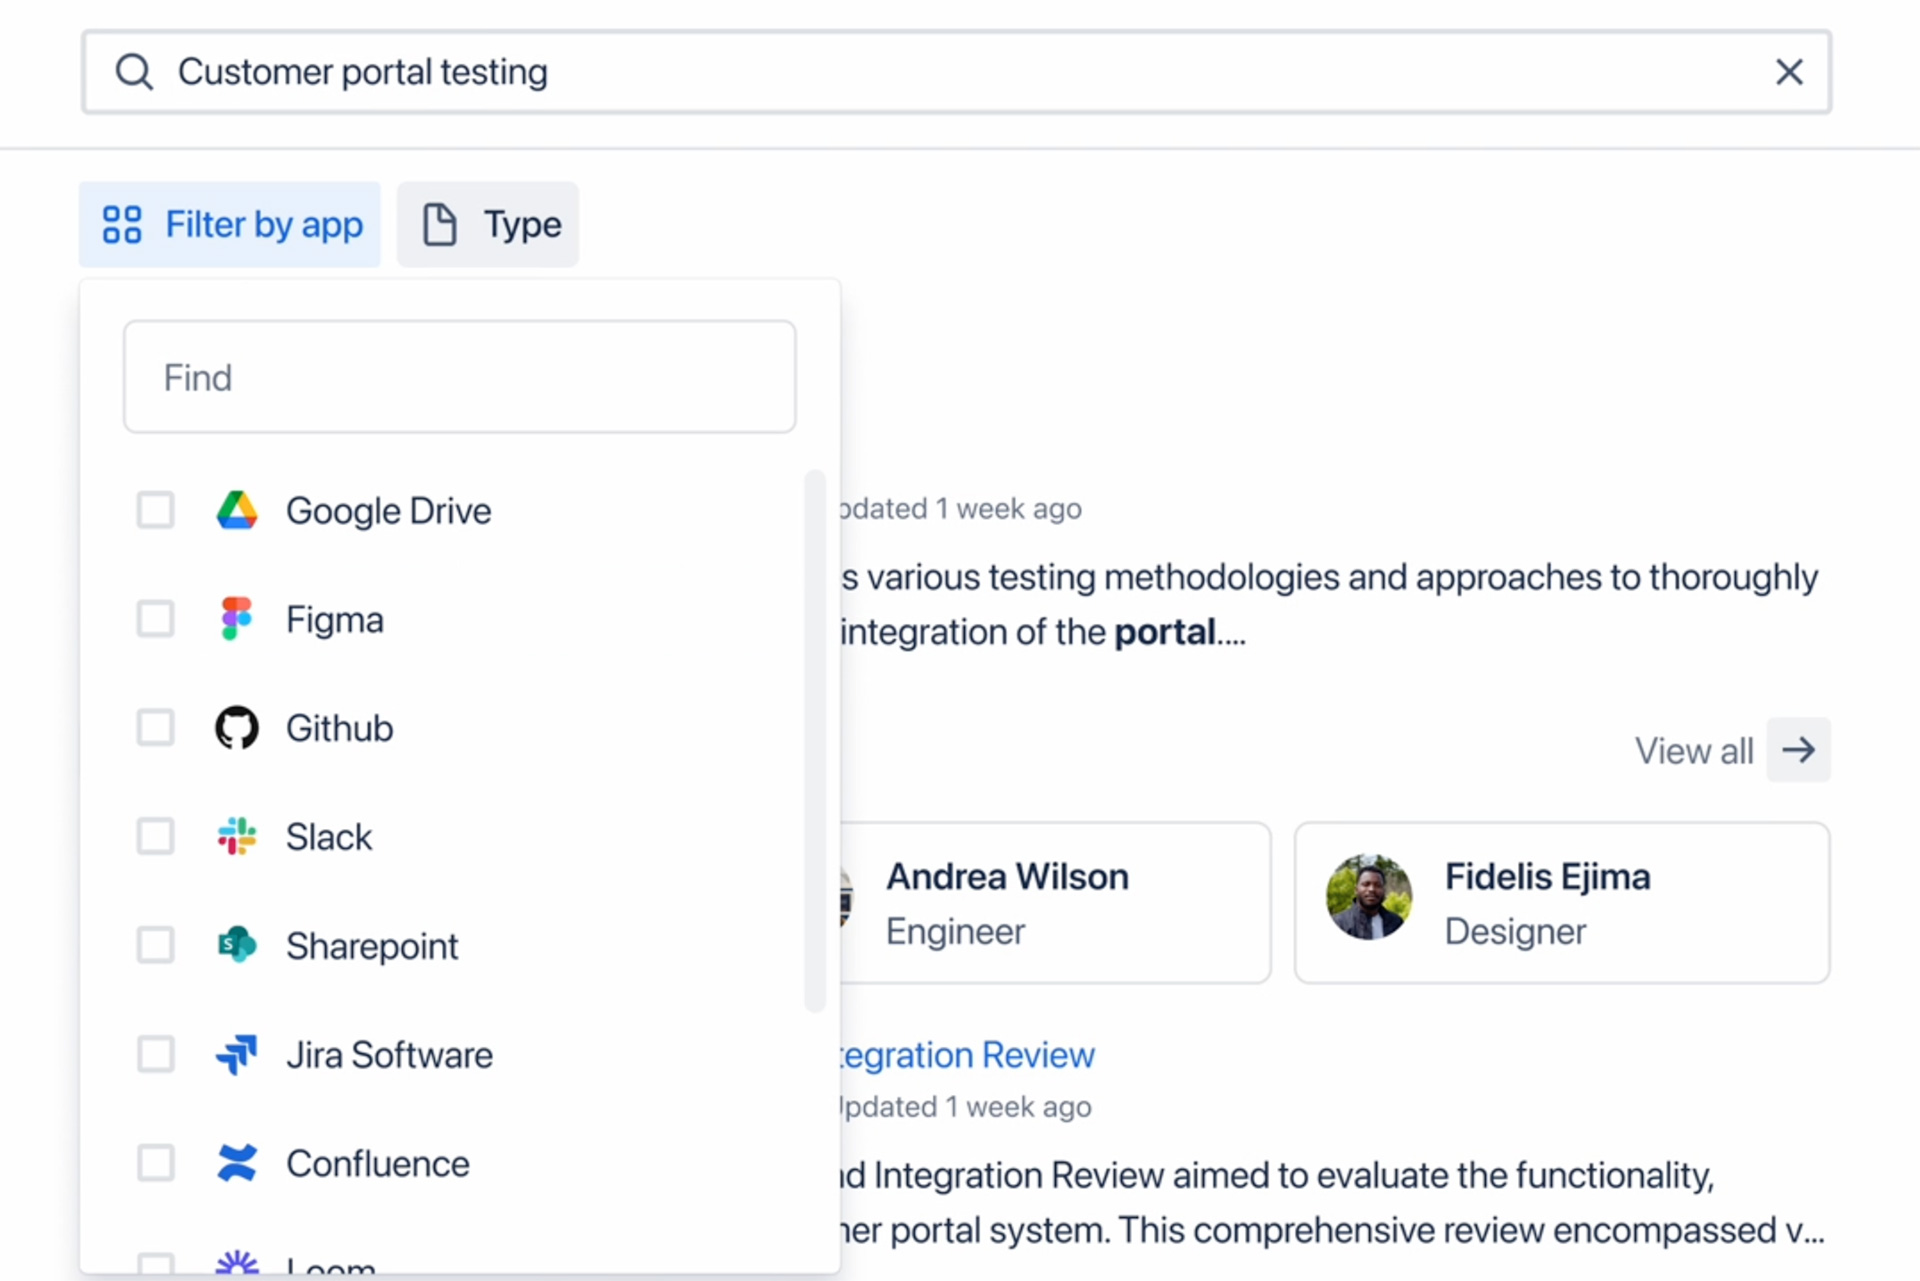 Atlassian introduces Rovo, an AI-powered knowledge discovery tool for the enterprise